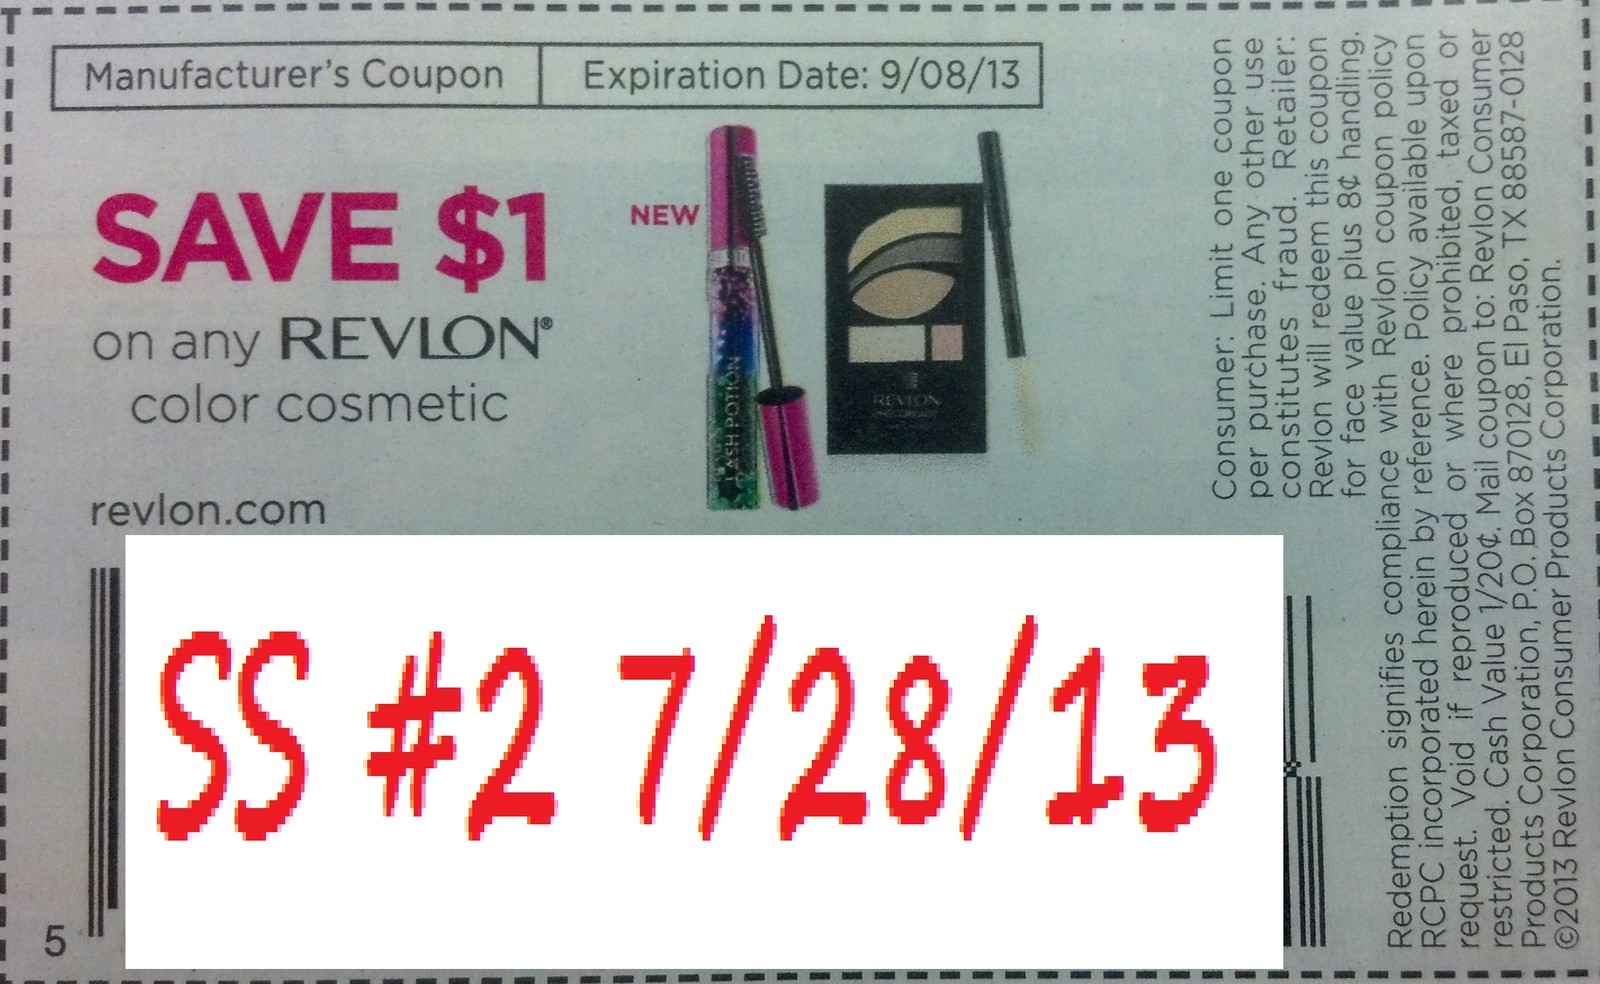 Save $1.00 on any Revlon color cosmetic Expires 09/08/2013